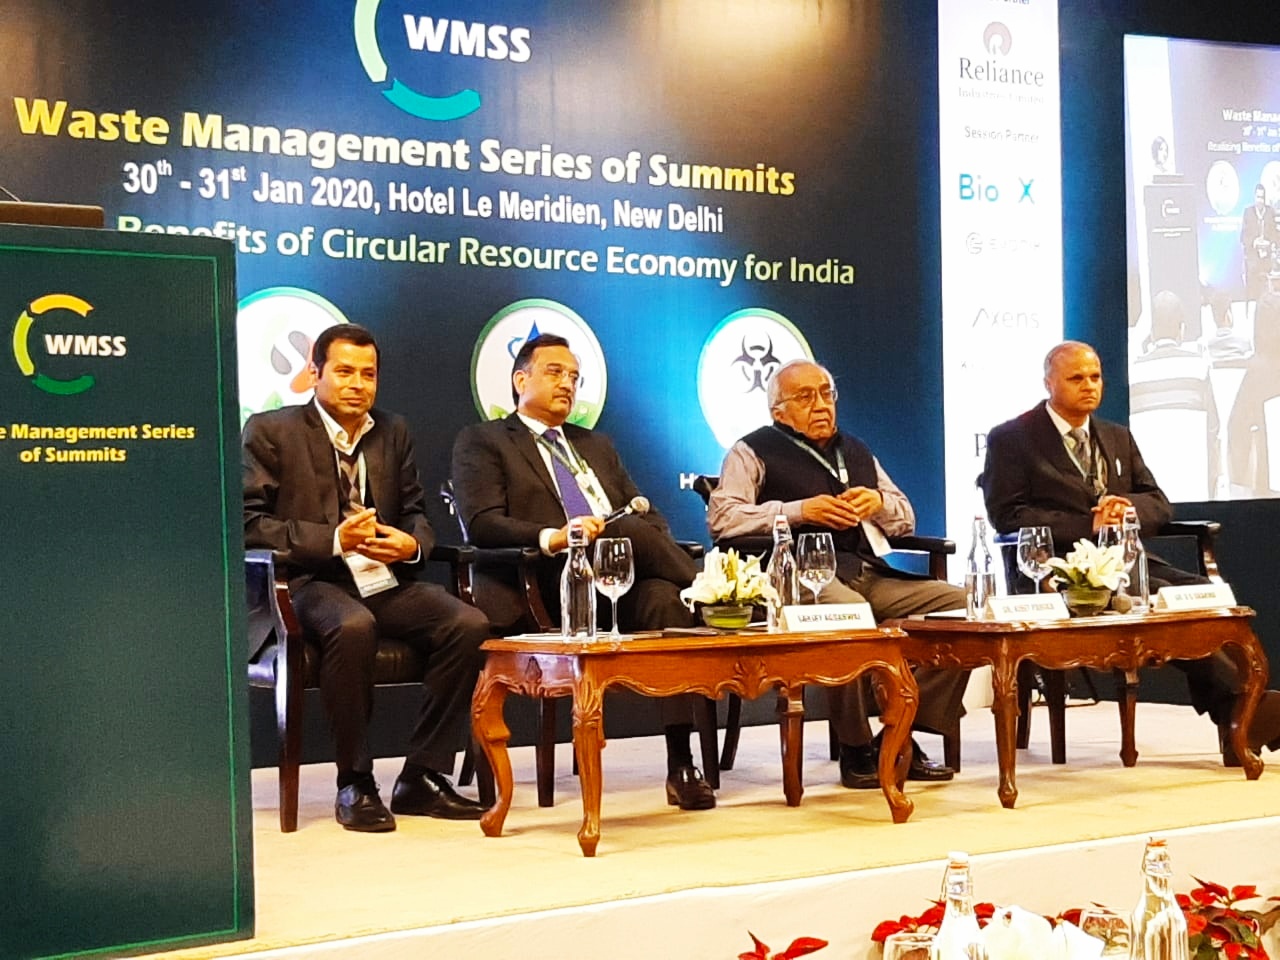 WMSS 2020 opens with discussions on how to strategize waste management system